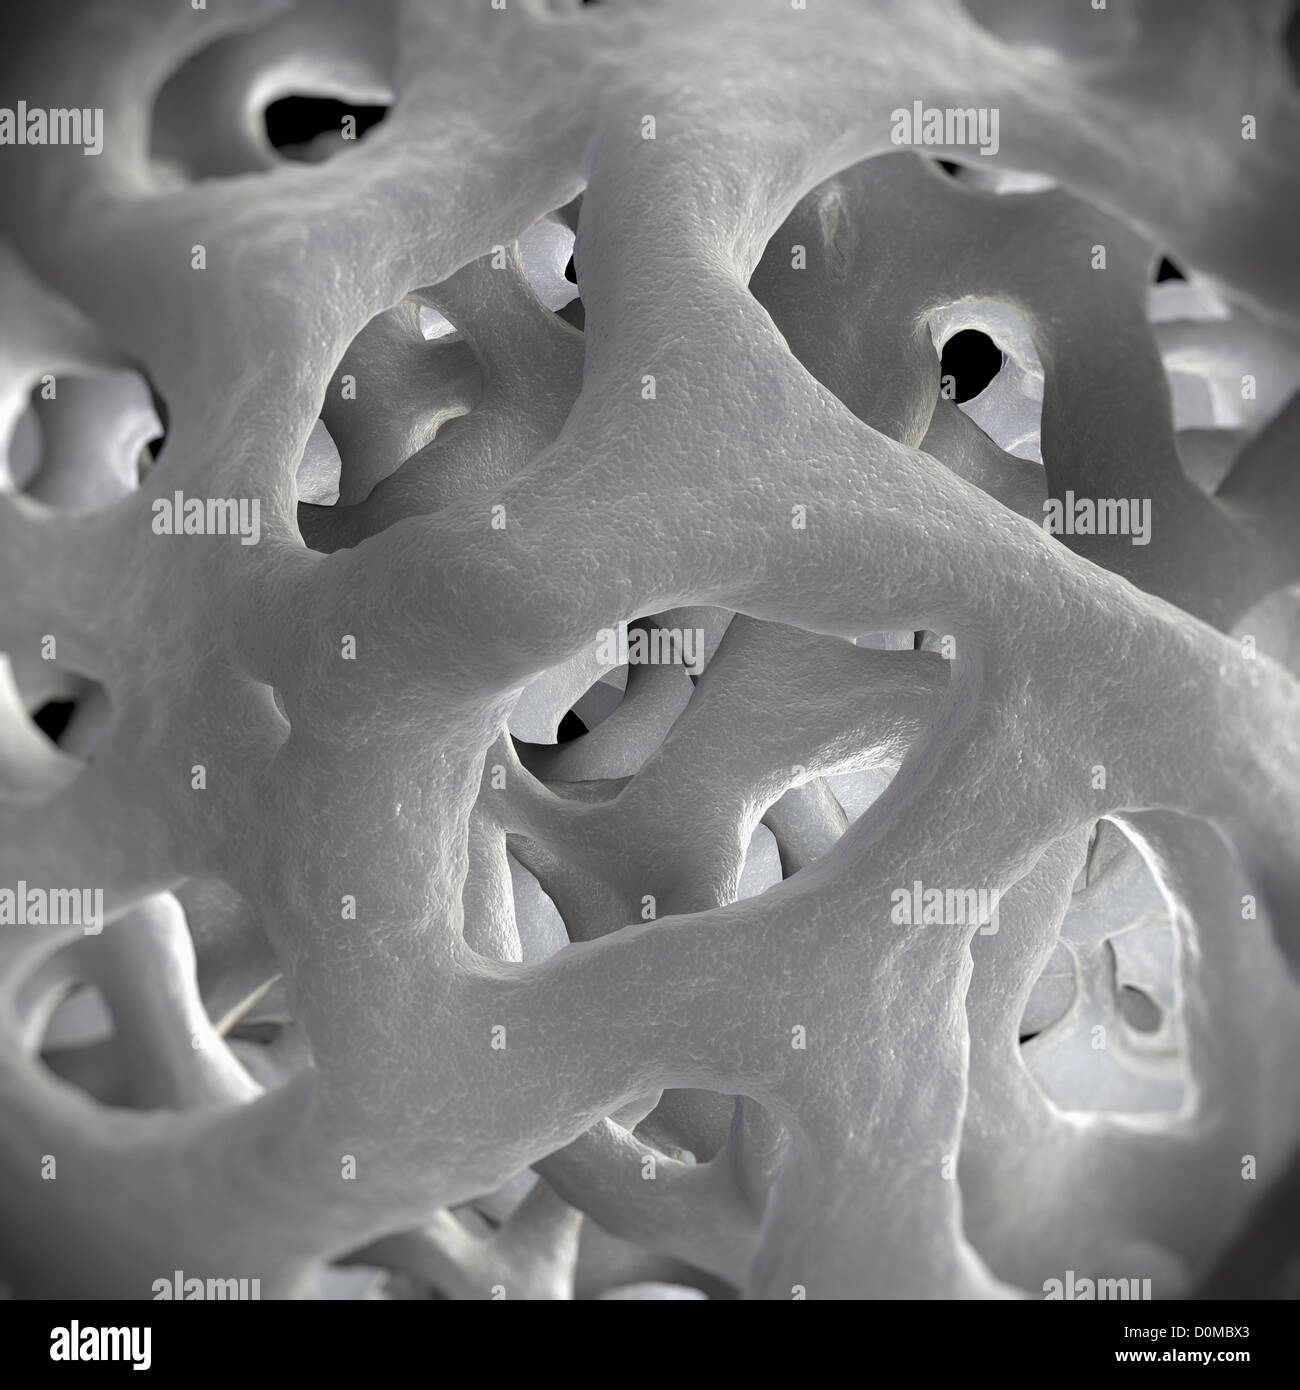 Perforated formations of cancellous or 'spongy' bone. Stock Photo